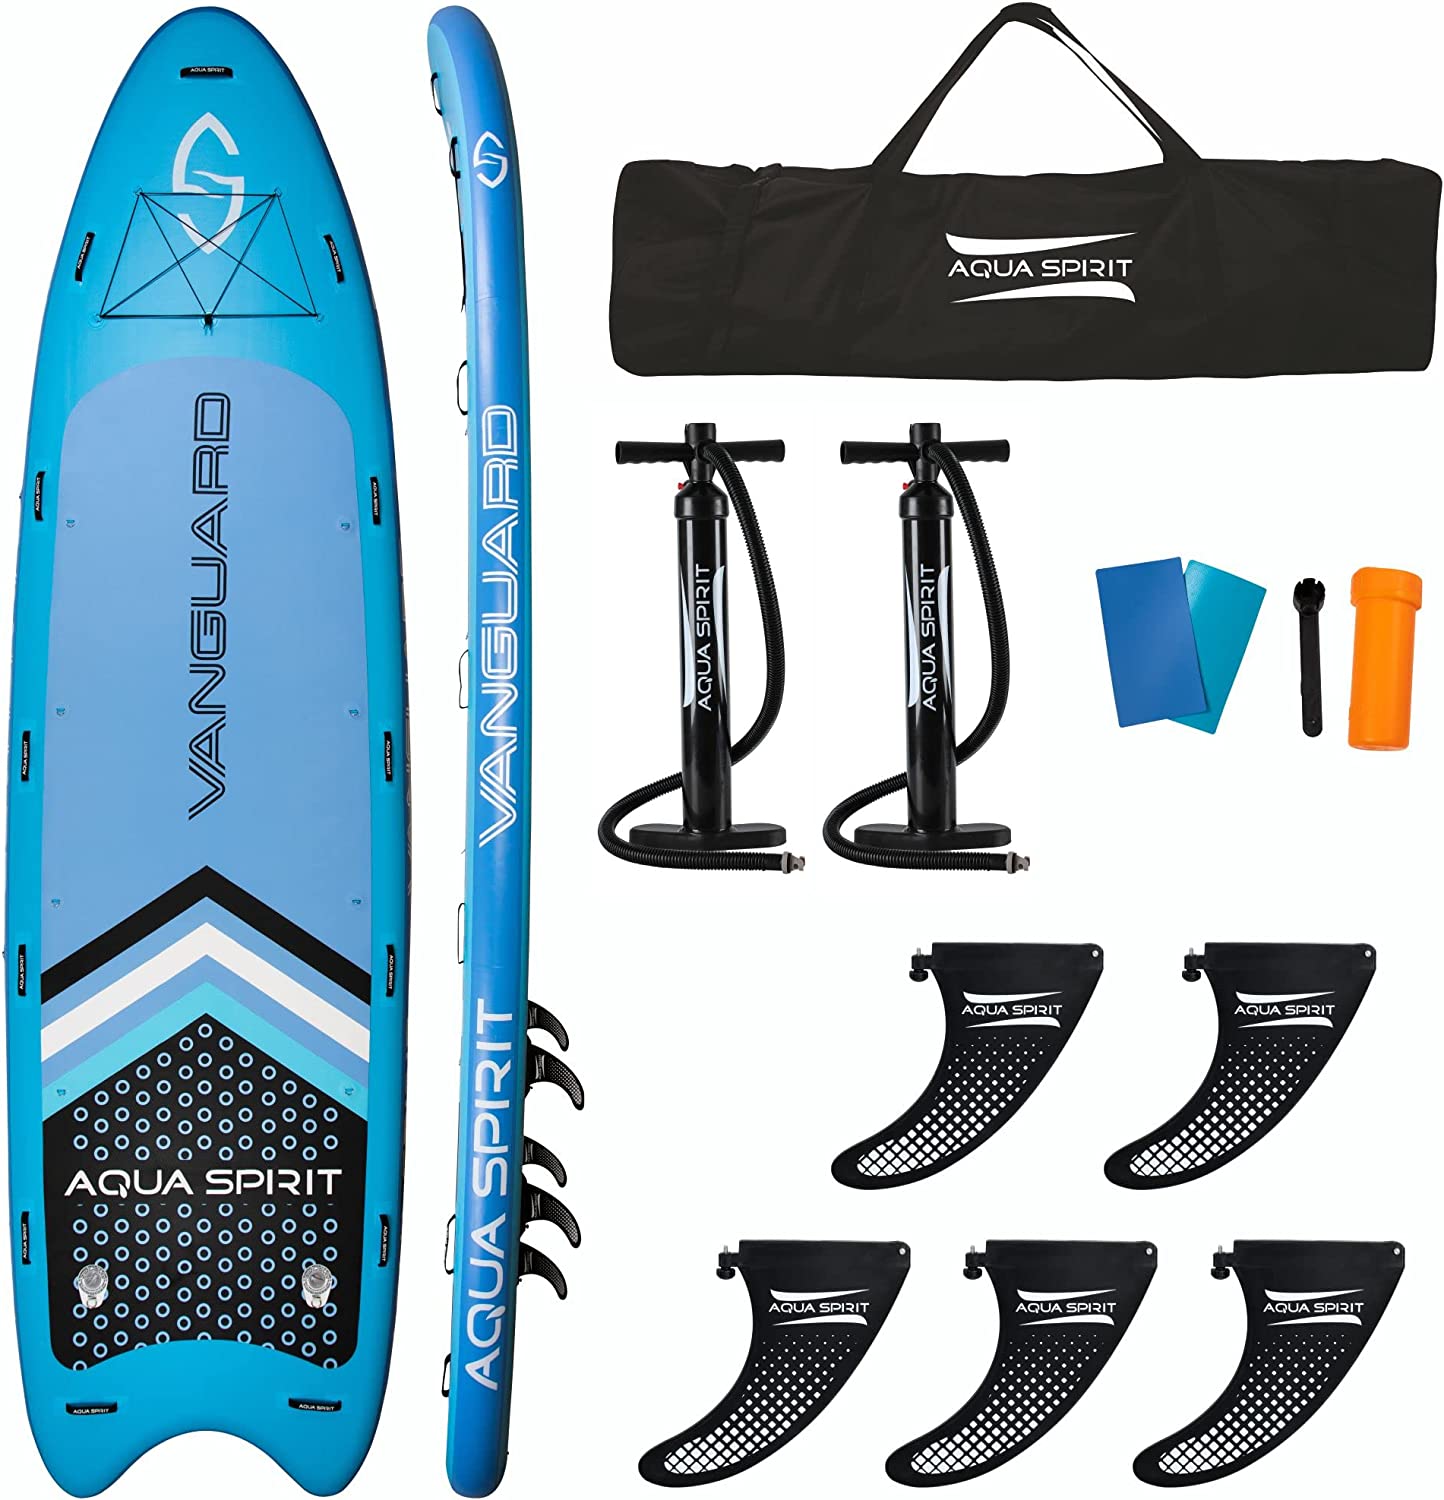 Aqua Spirit Vanguard Family Inflatable SUP for Group Adventures | 18' x 5’ x 8” | with Carry Bag, Double-Action Pump and more accessories | Up To 10 Person | 500KG Limit | 1 Year Warranty - Aqua Spirit iSUPs UK